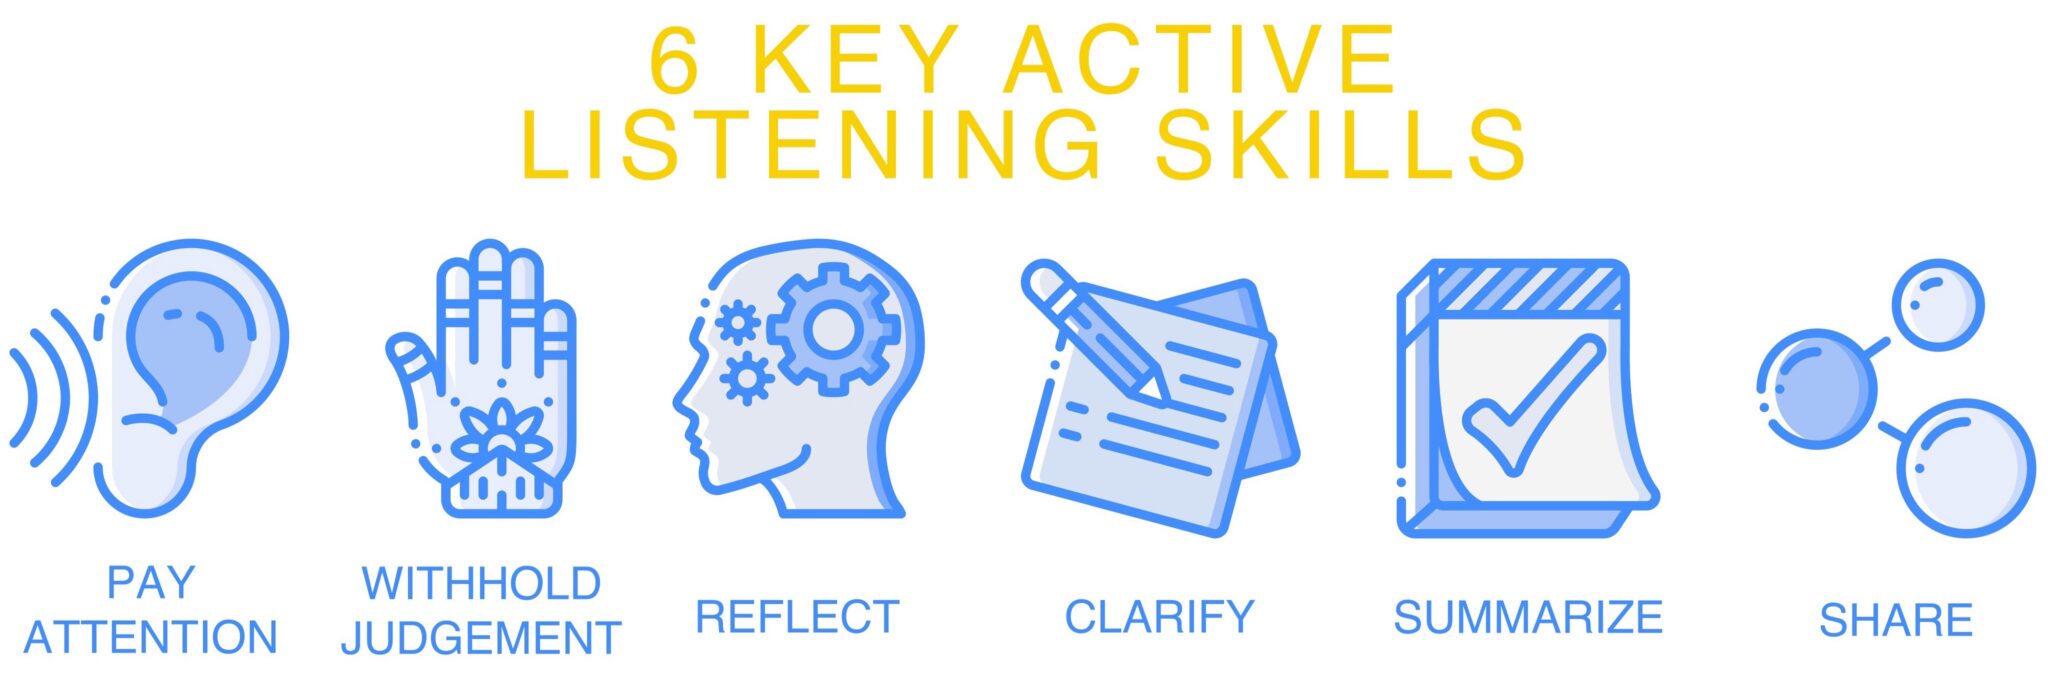 active listening in a sentence